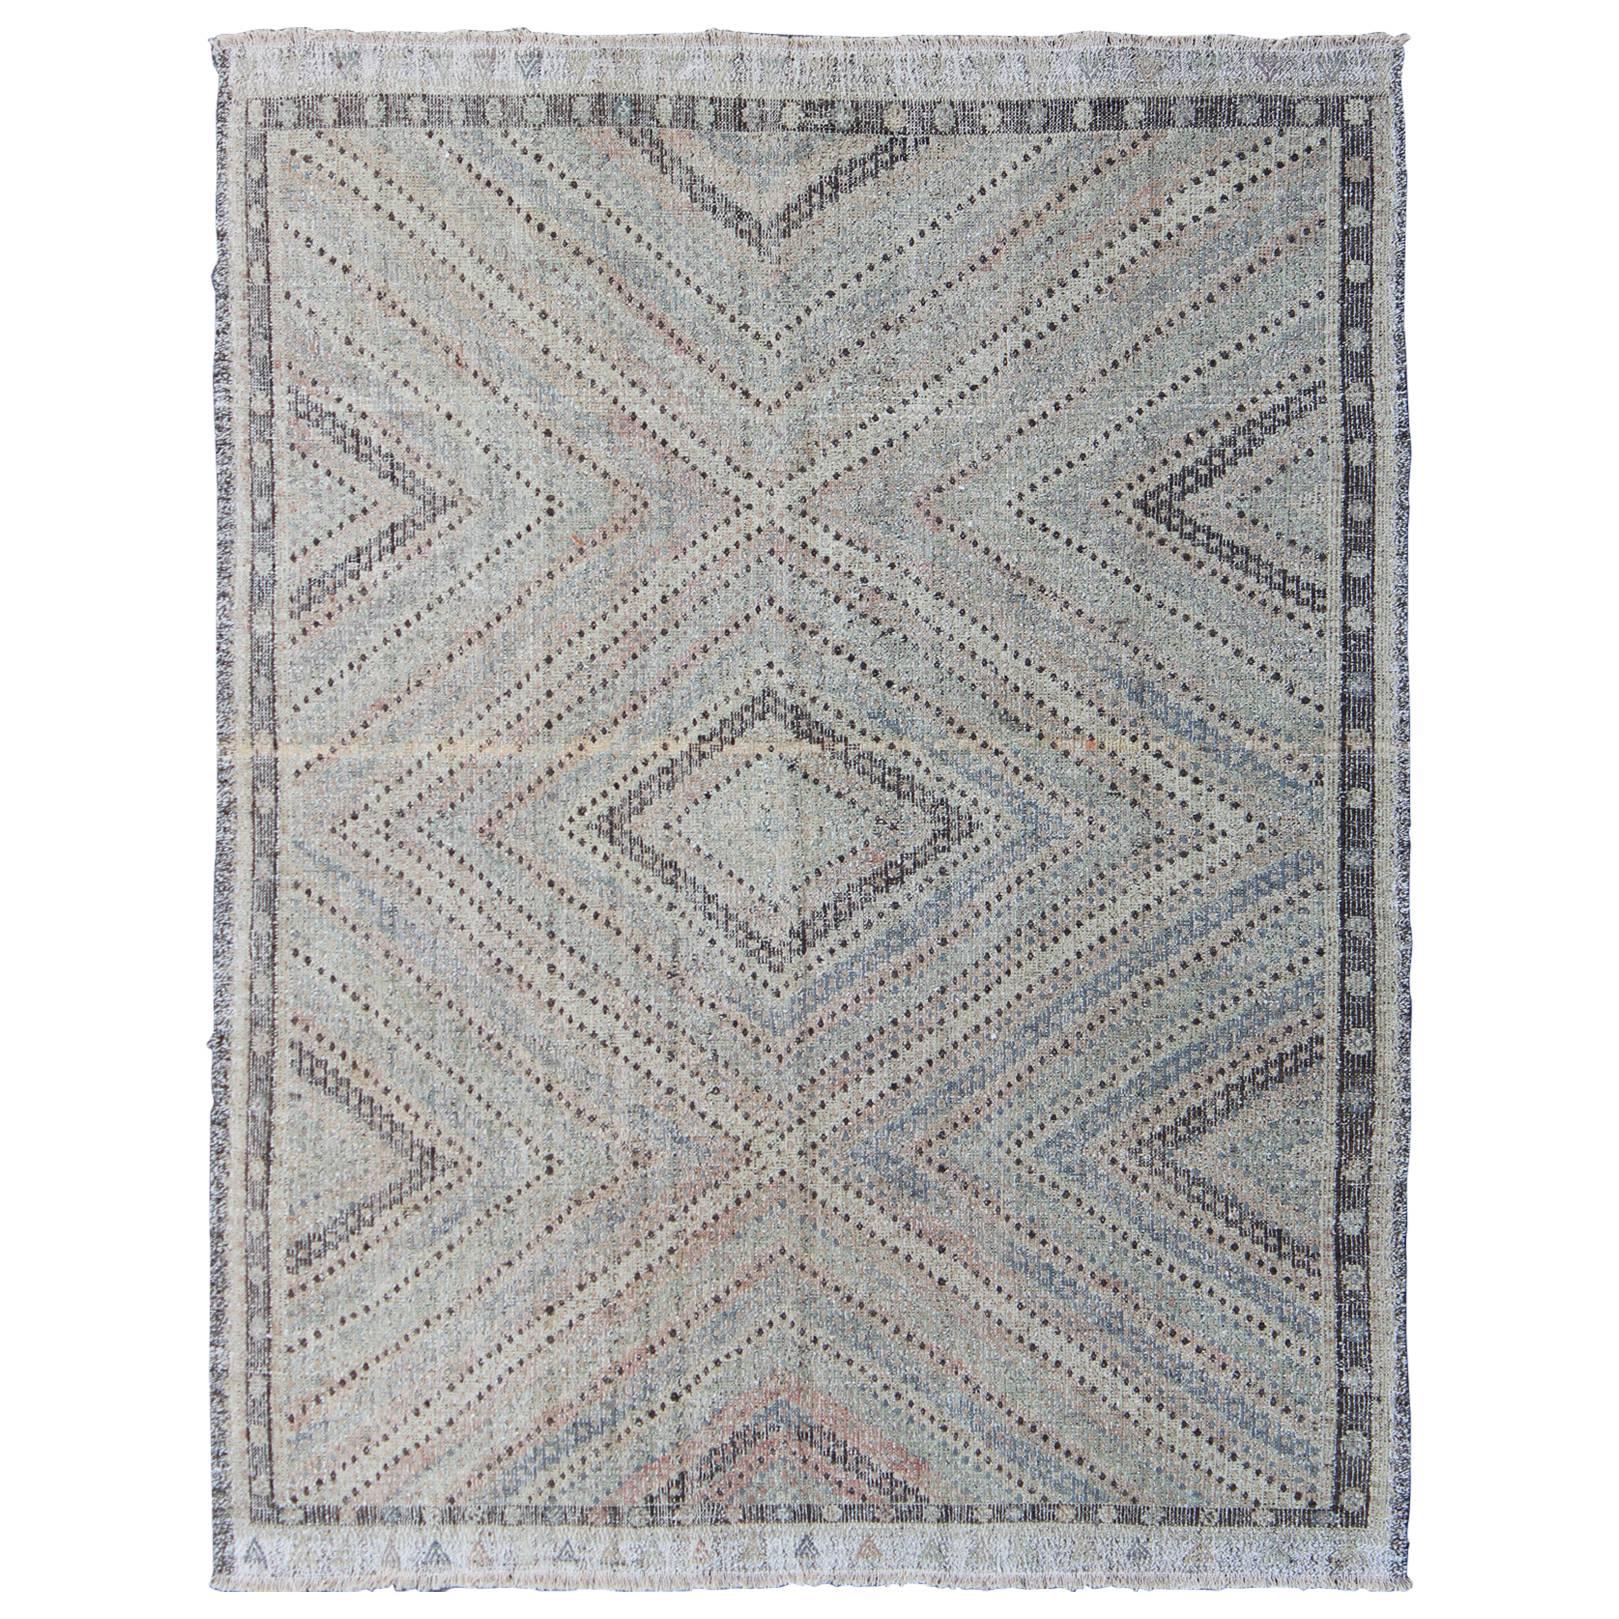 Embroidered Kilim in Light Blue, Gray, Light Teal, Brown & Pastel Colors  